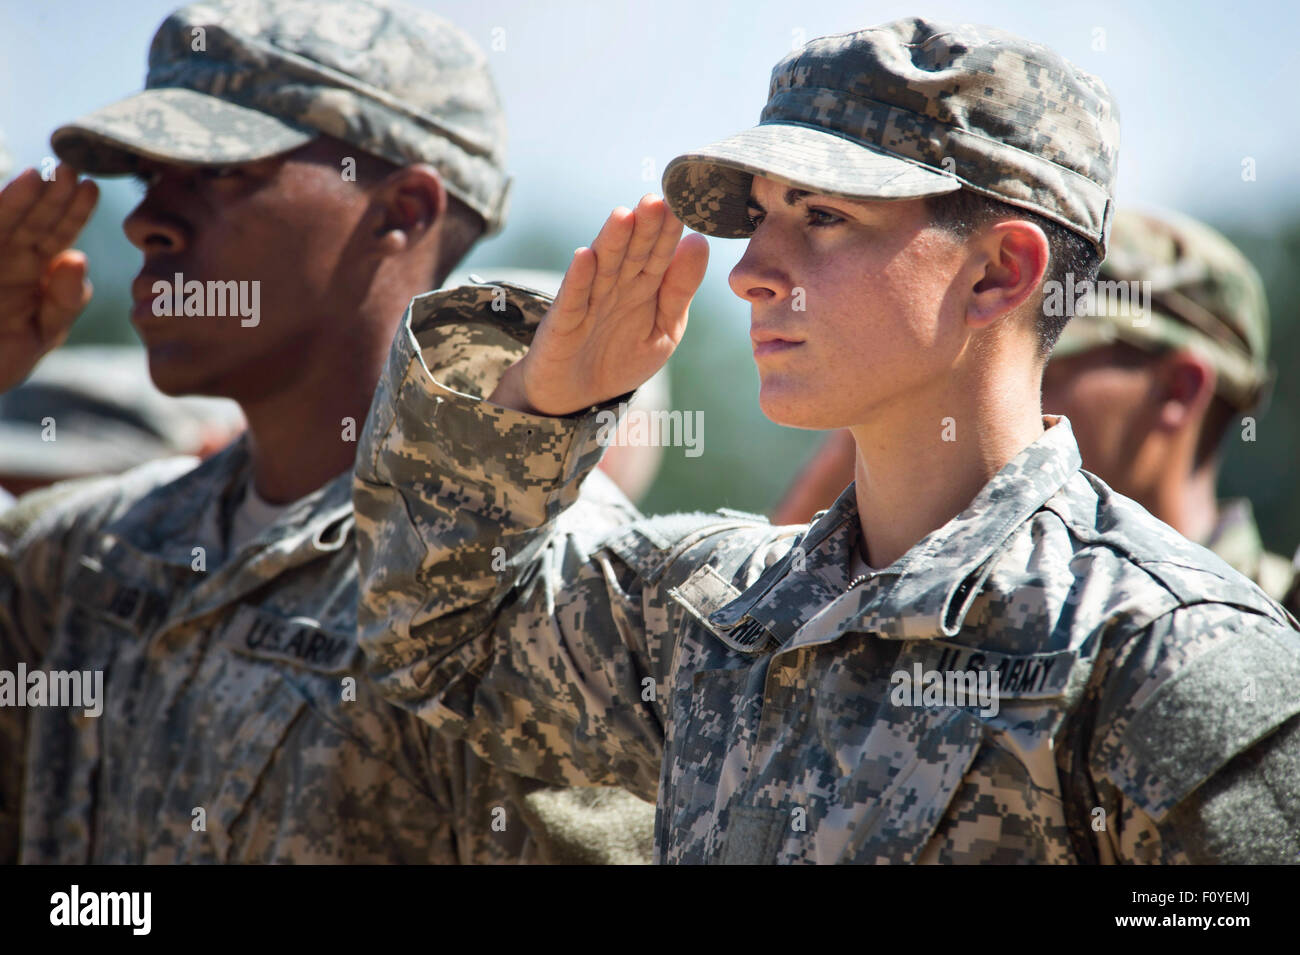 U.S. Army Captain Kristen Griest salutes during graduation ceremonies at the Army Ranger school August 21, 2015 in Fort Benning, Georgia. Griest and fellow soldier 1st Lt Shaye Haver became the first women to graduate from the 61-day-long Ranger course considered one of the most intense and demanding in the military. Stock Photo